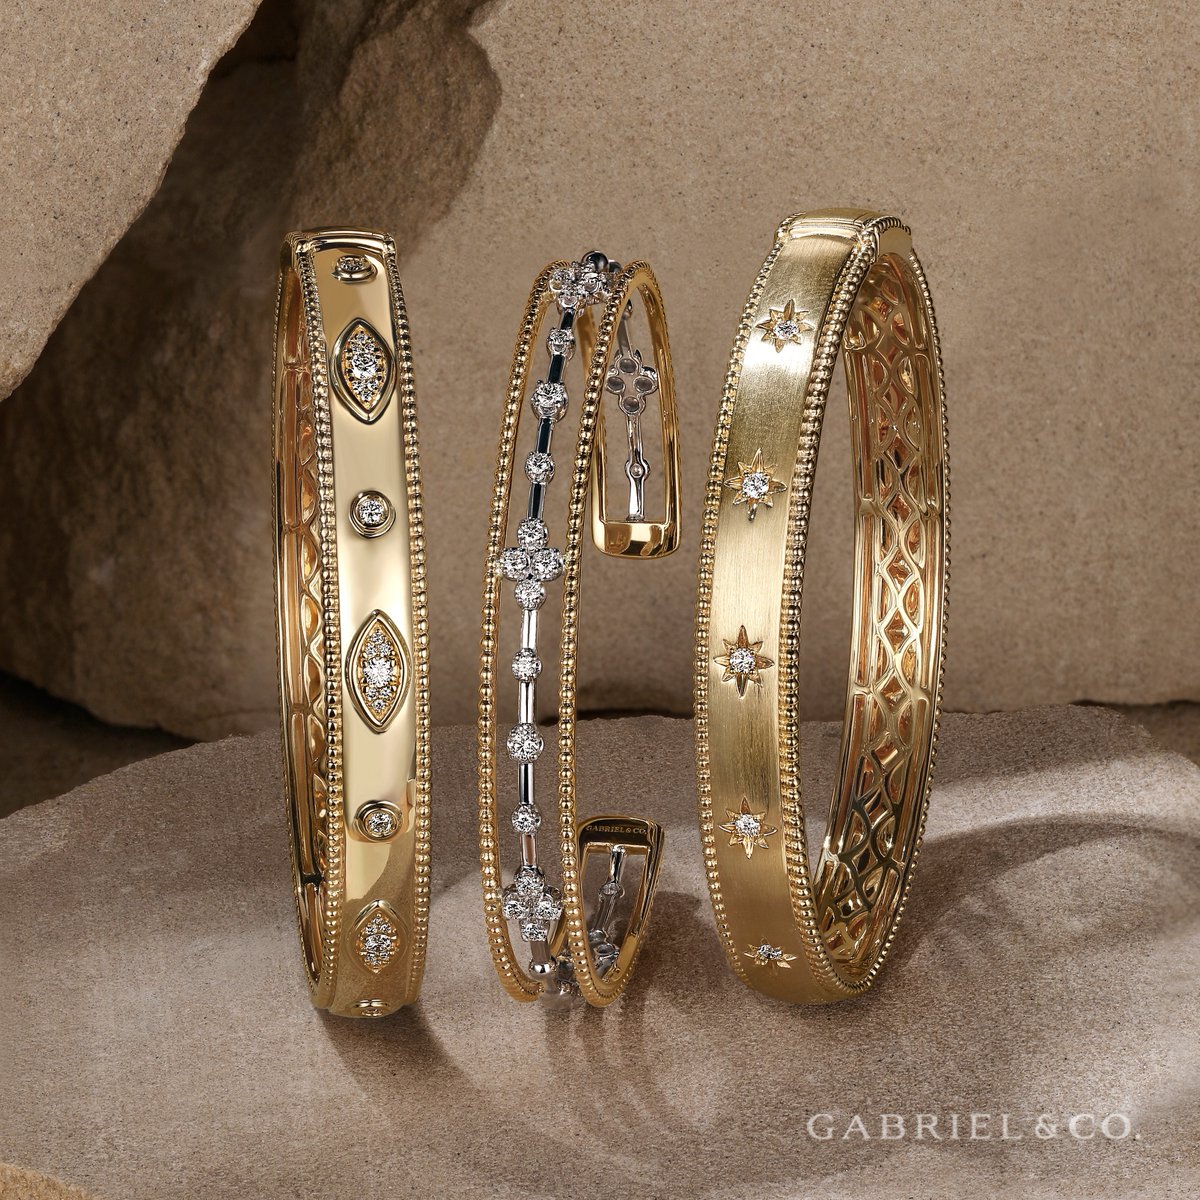 Add a touch of dazzling elegance to your wrist with our stunning Bujukan diamond bangles. 
Styles: BG4935-62Y45JJ, BG4908-62M45JJ & BG4913-62Y45JJ
Shop them all at bit.ly/3NL86up.
#gabrielandco #bujukancollection #bujukanbracelets